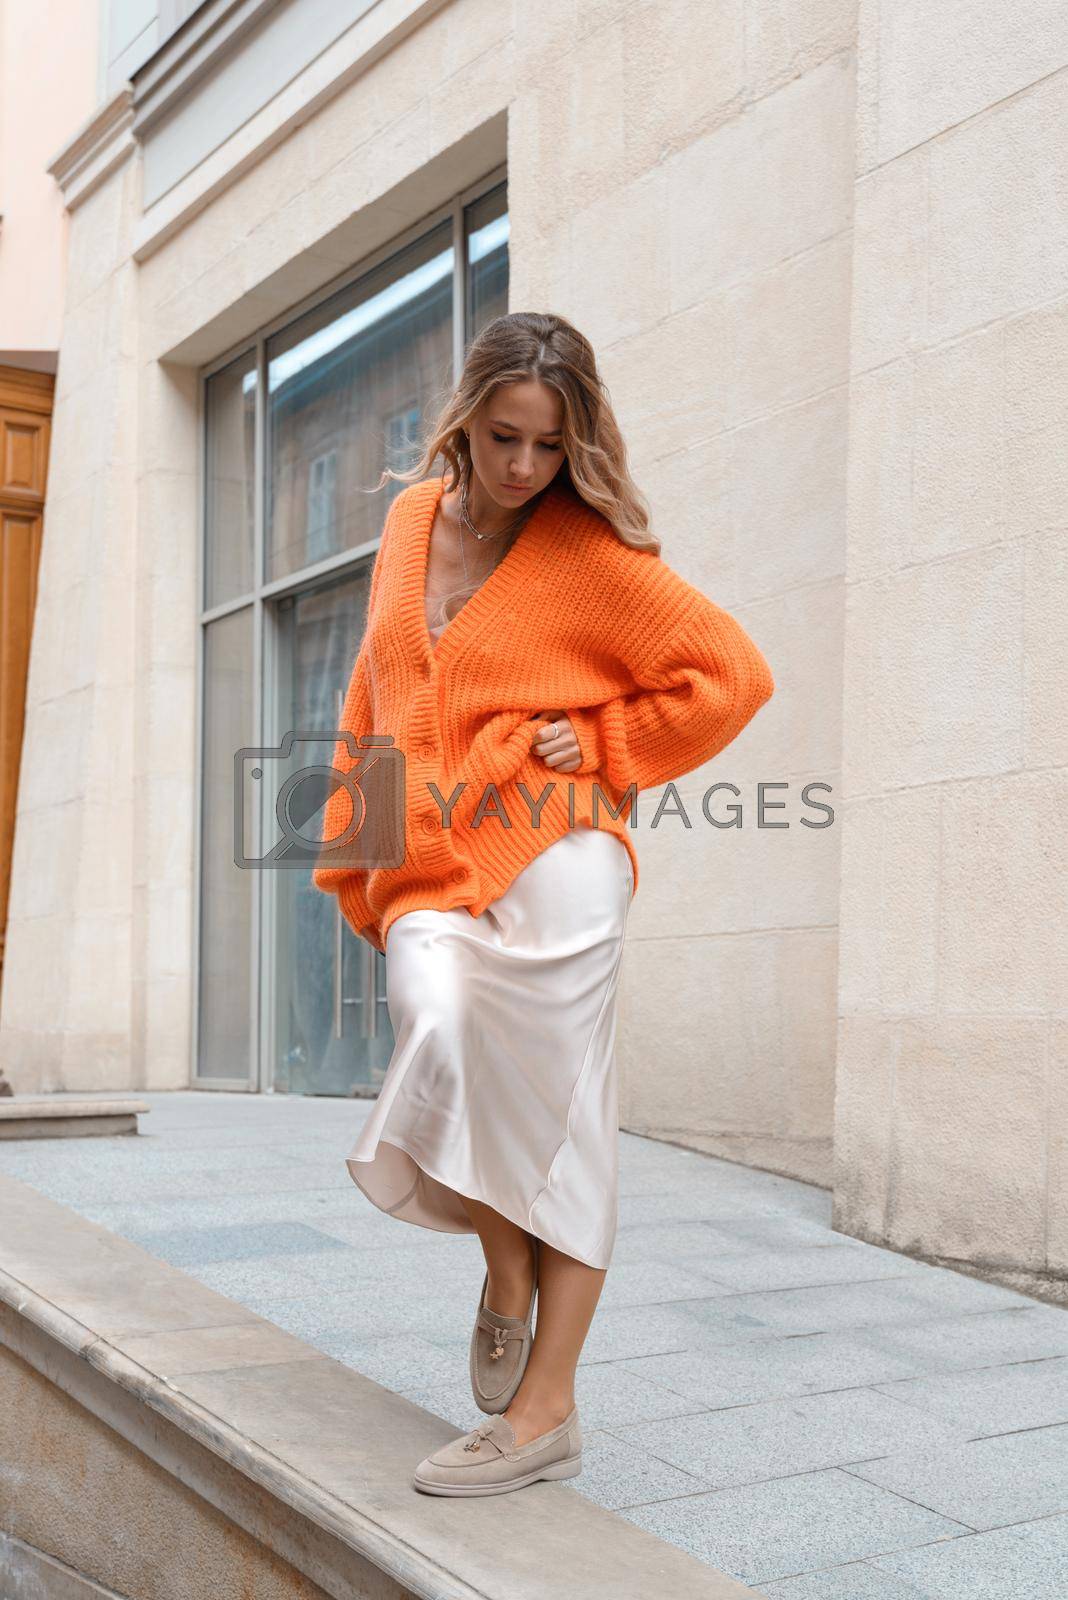 Royalty free image of Portrait of fashionable women in orange sweater and beige dress posing in the street by Ashtray25